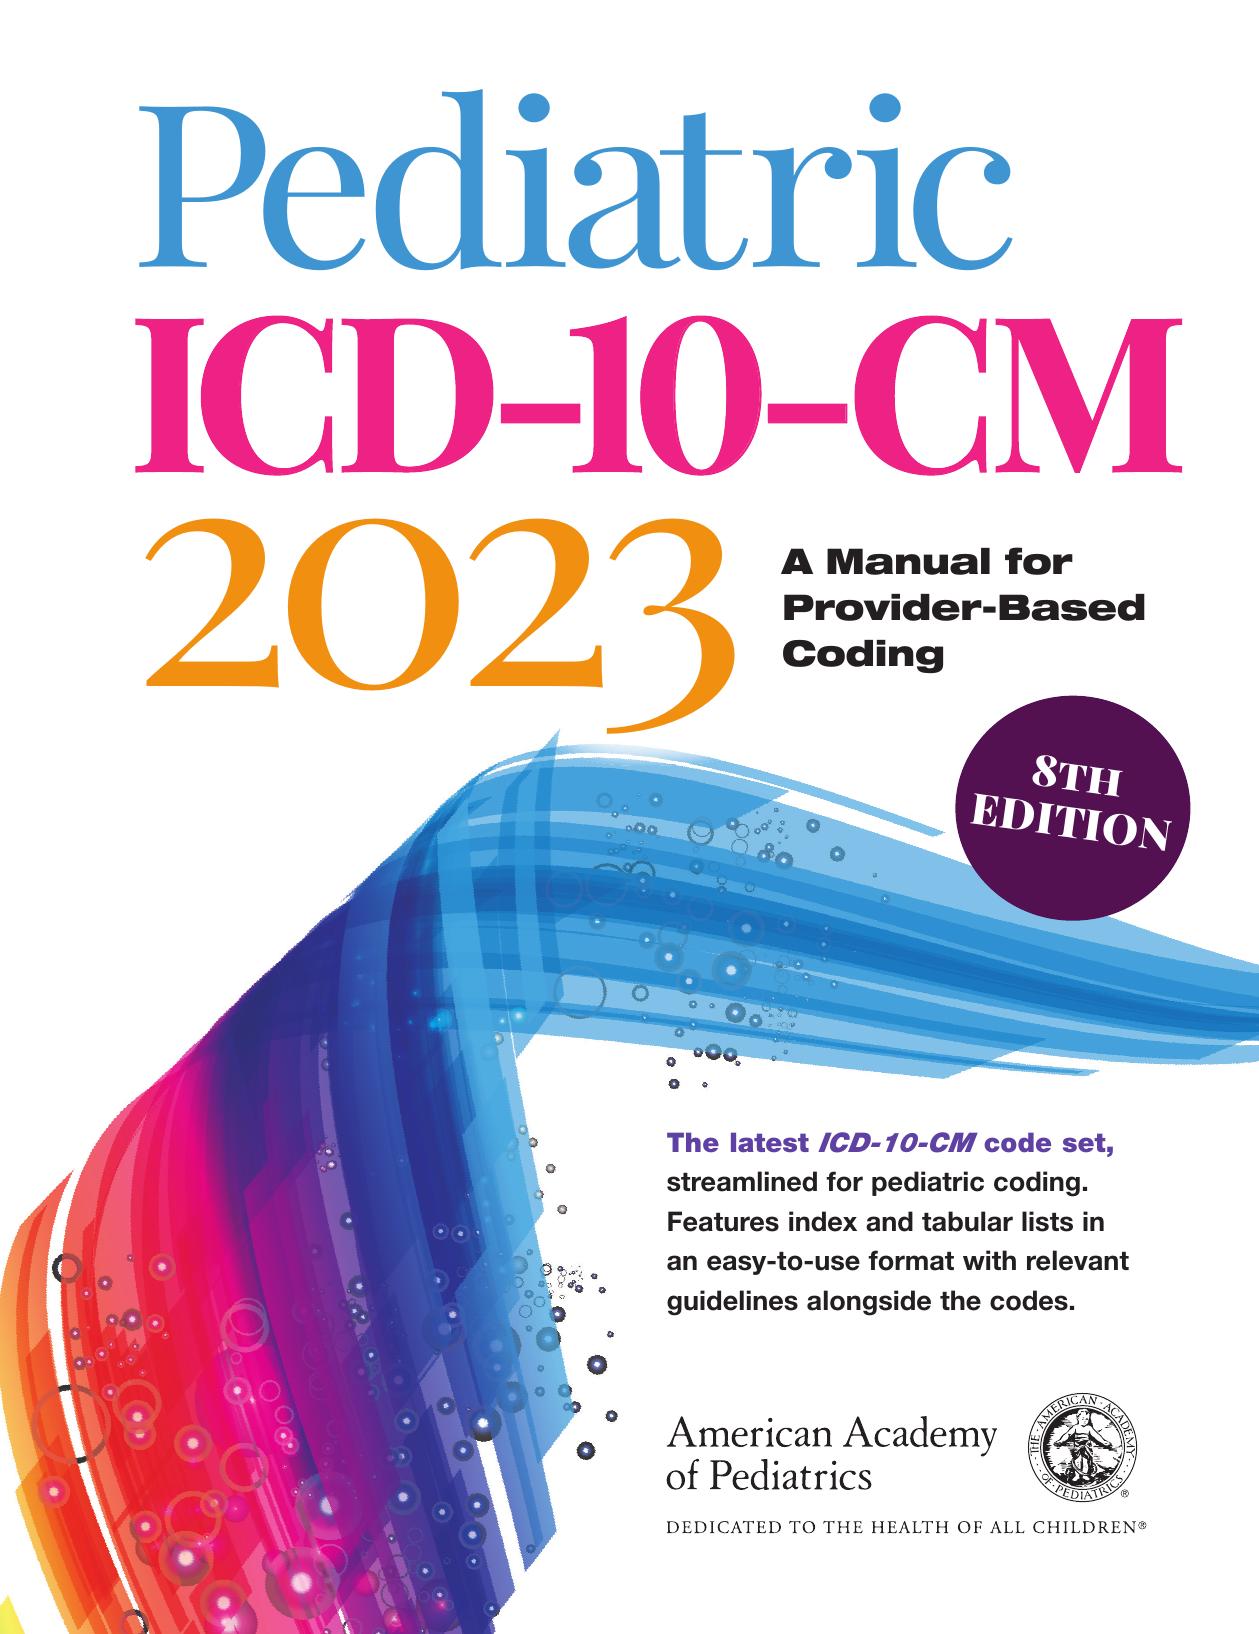 Pediatric ICD-10-CM 2023: A Manual for Provider-Based Coding by American Academy of Pediatrics Committee on Coding and Nomenclature